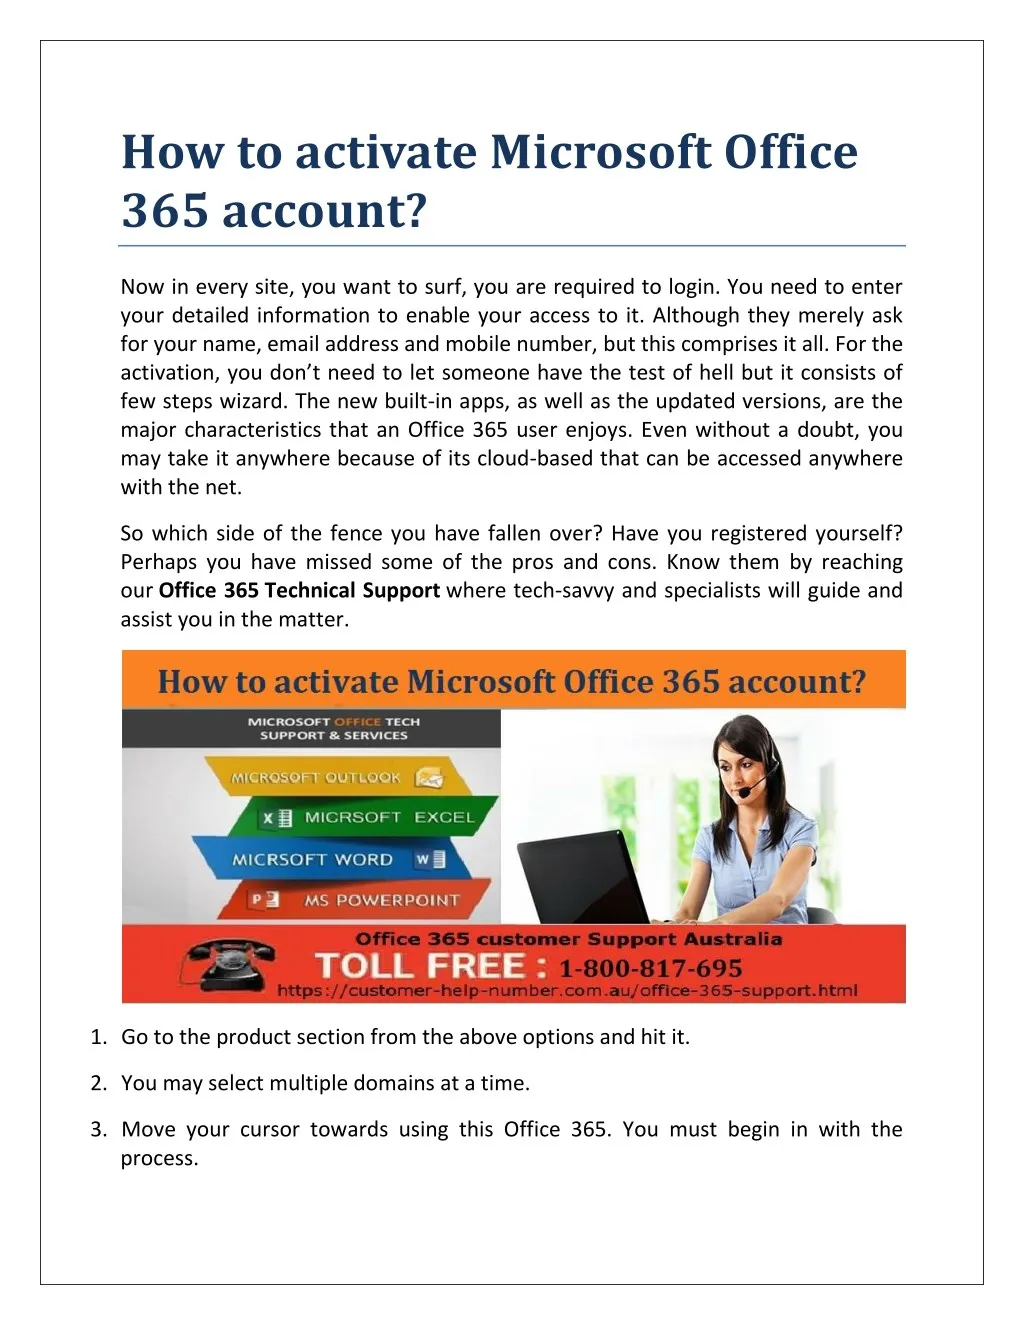 What Are the Pros and Cons of Office 365?